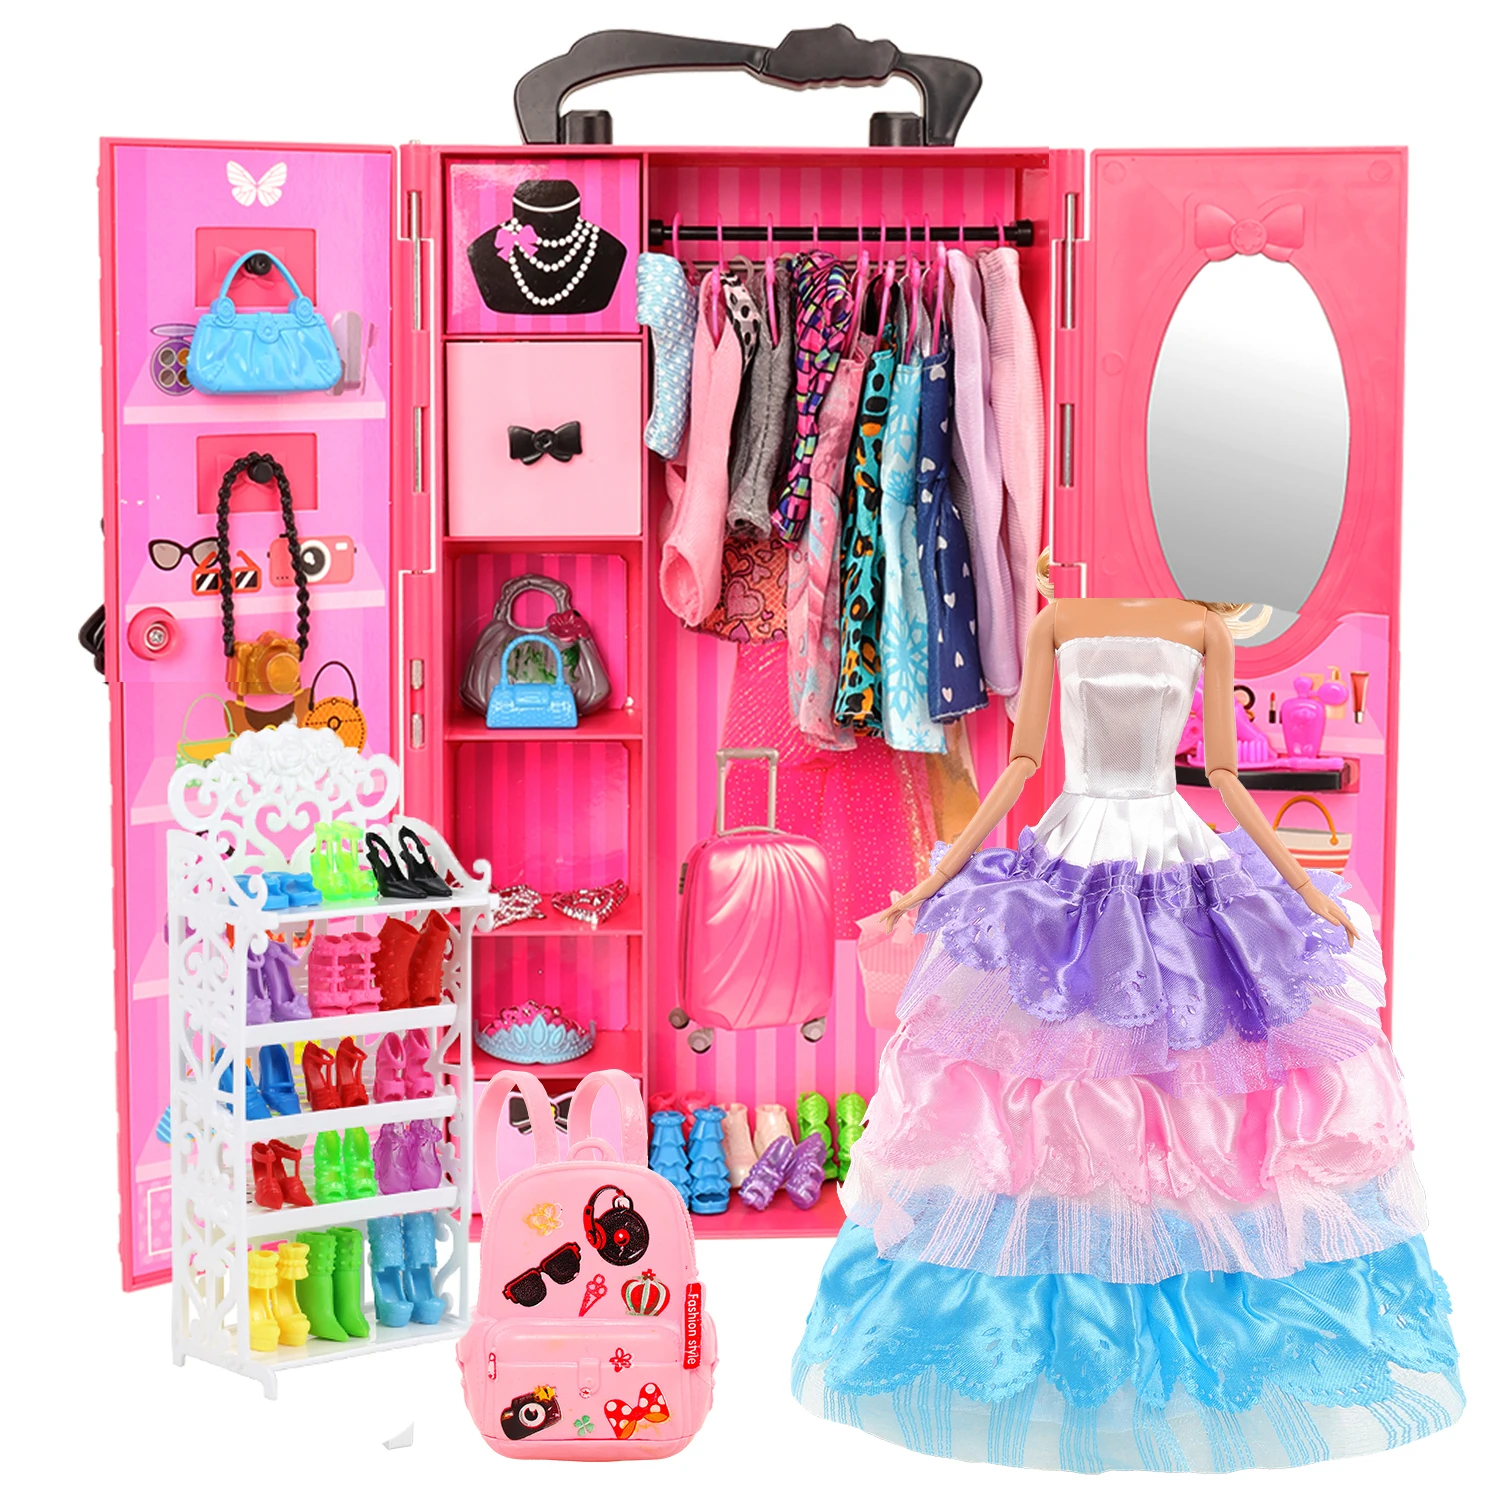 Doll House Funiture 42 Item =1 Wardrobe + 41 Accessories Dress Crown Necklace Shoes Glasses For Barbie Toys Gift Girls Closet mix toy sandals glasses bags for 1 6 doll fashion sunglasses shoes handbag caps for barbie doll accessories dressing up toys jj